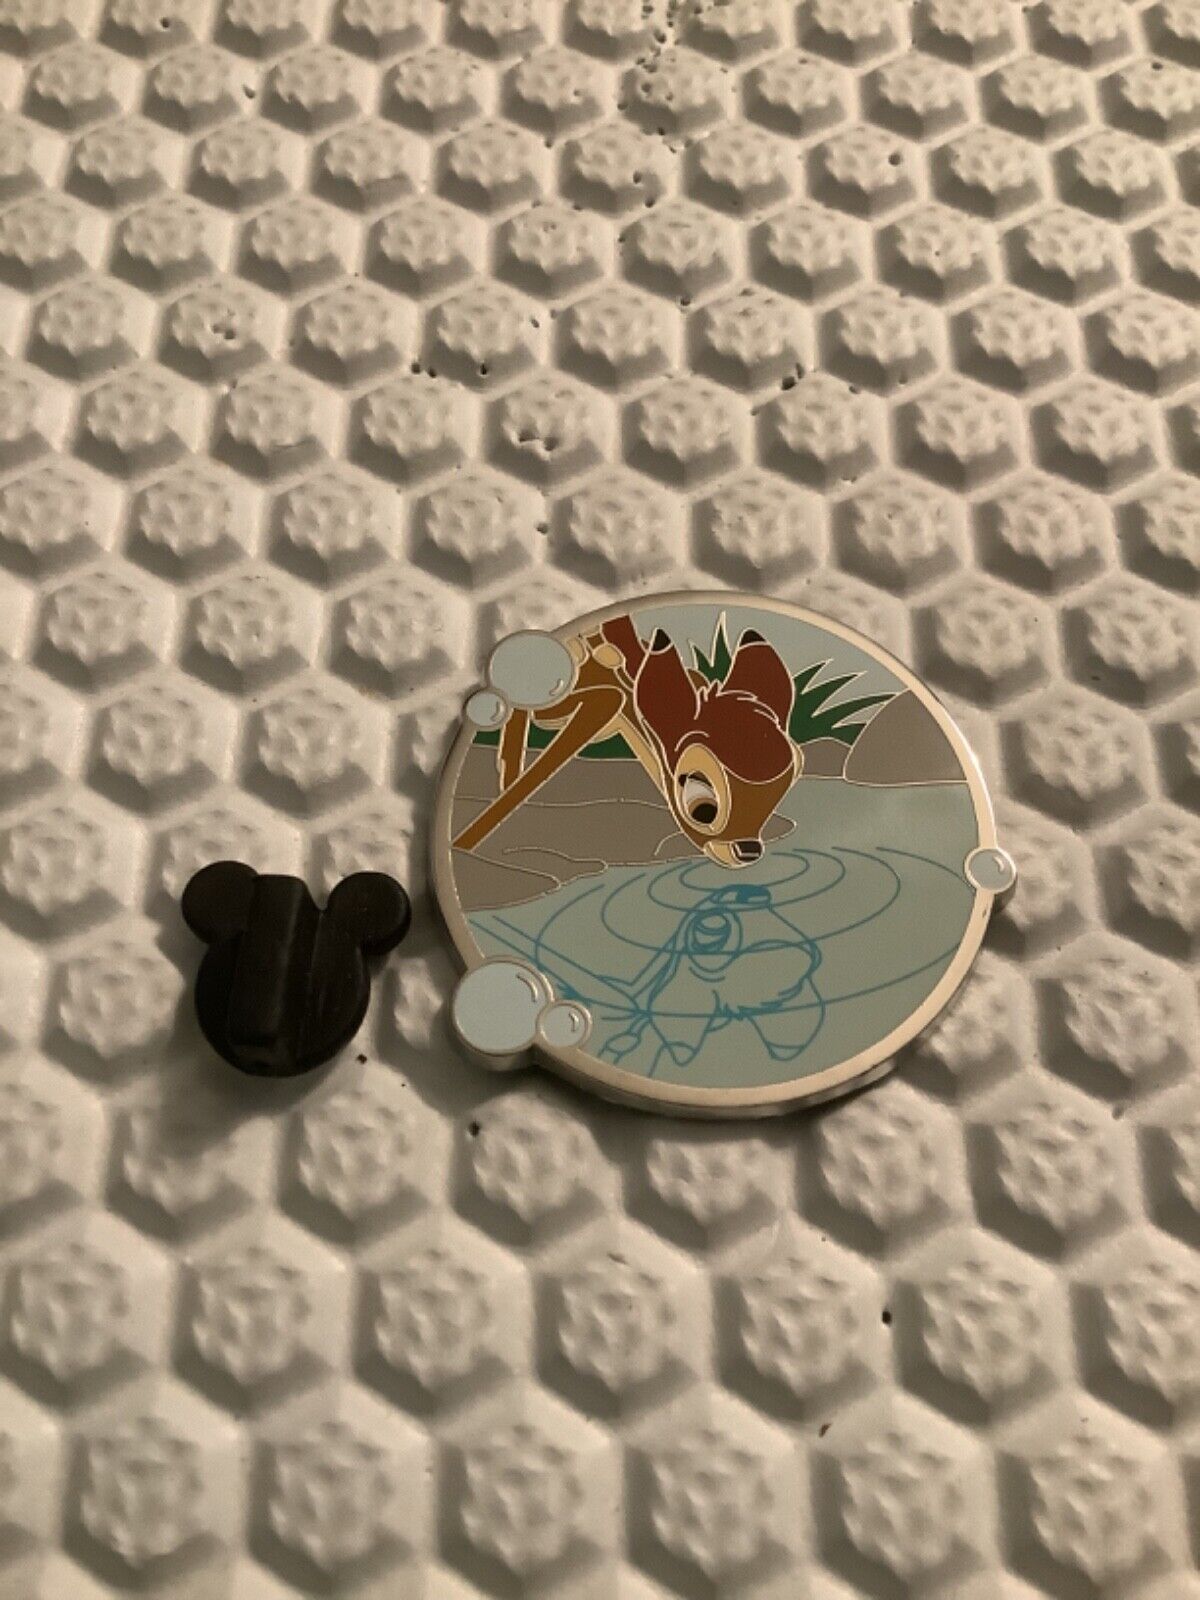 WOW 2022 AUTHENTIC “BAMBI” DISNEY REFLECTIONS MYSTERY PIN Thumper WOW